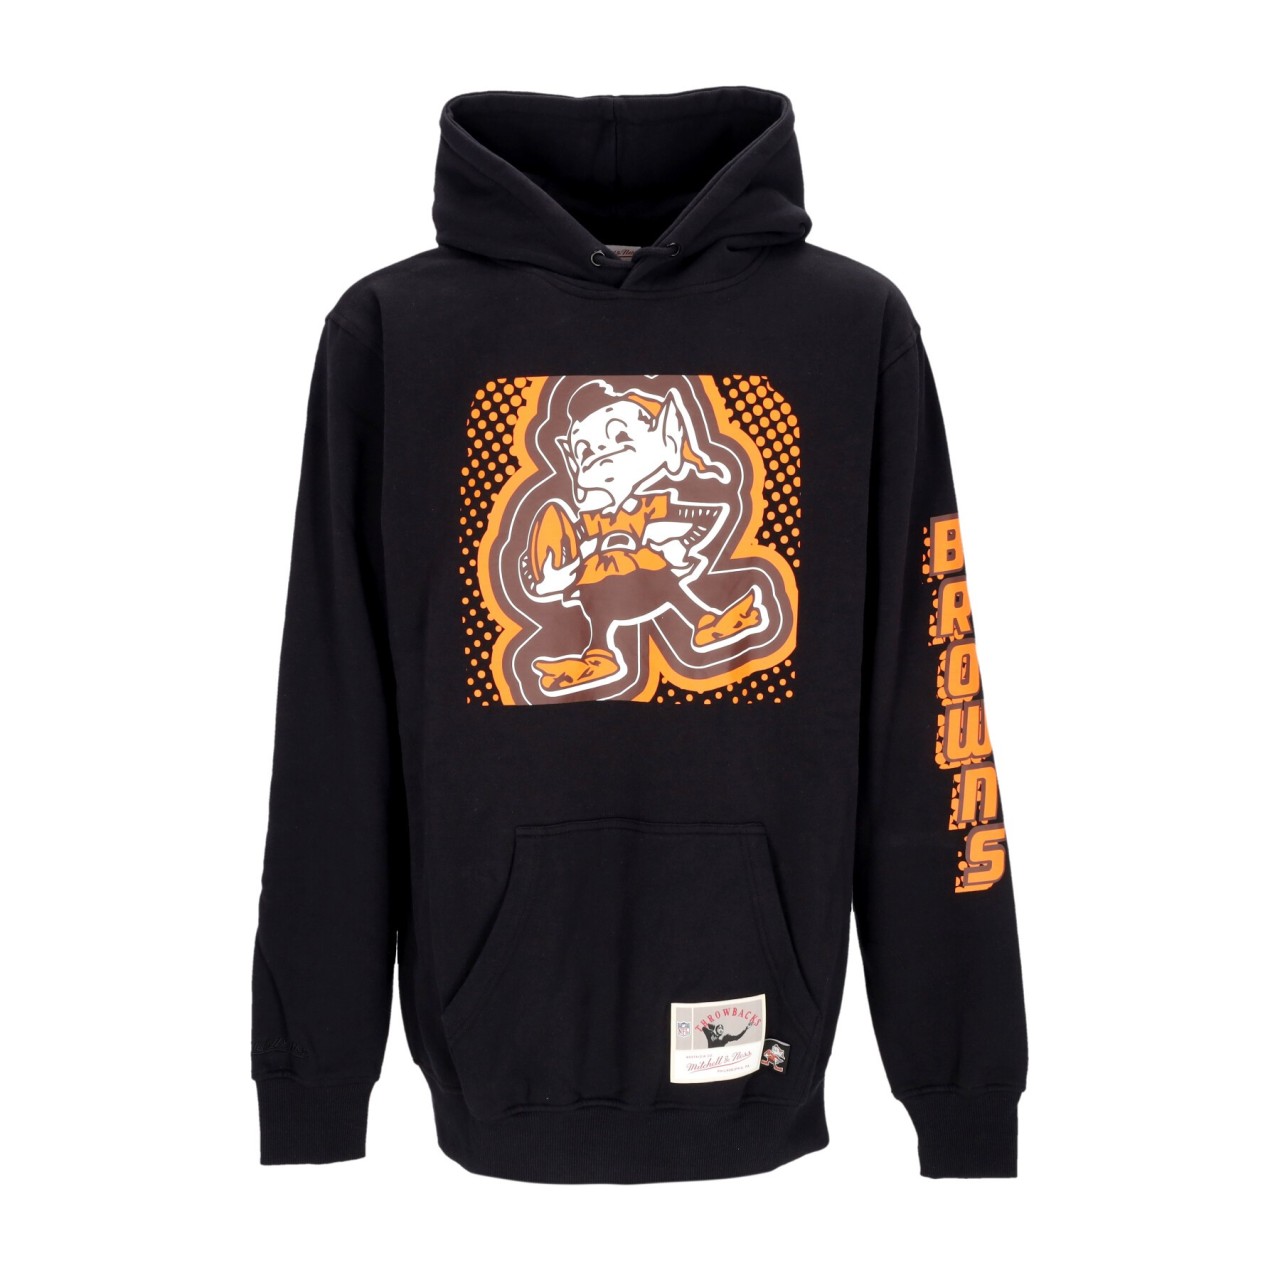 MITCHELL & NESS NFL BIG FACE 7.0 HOODIE CLEBRO FPHD5901-CBRYYPPPBLCK